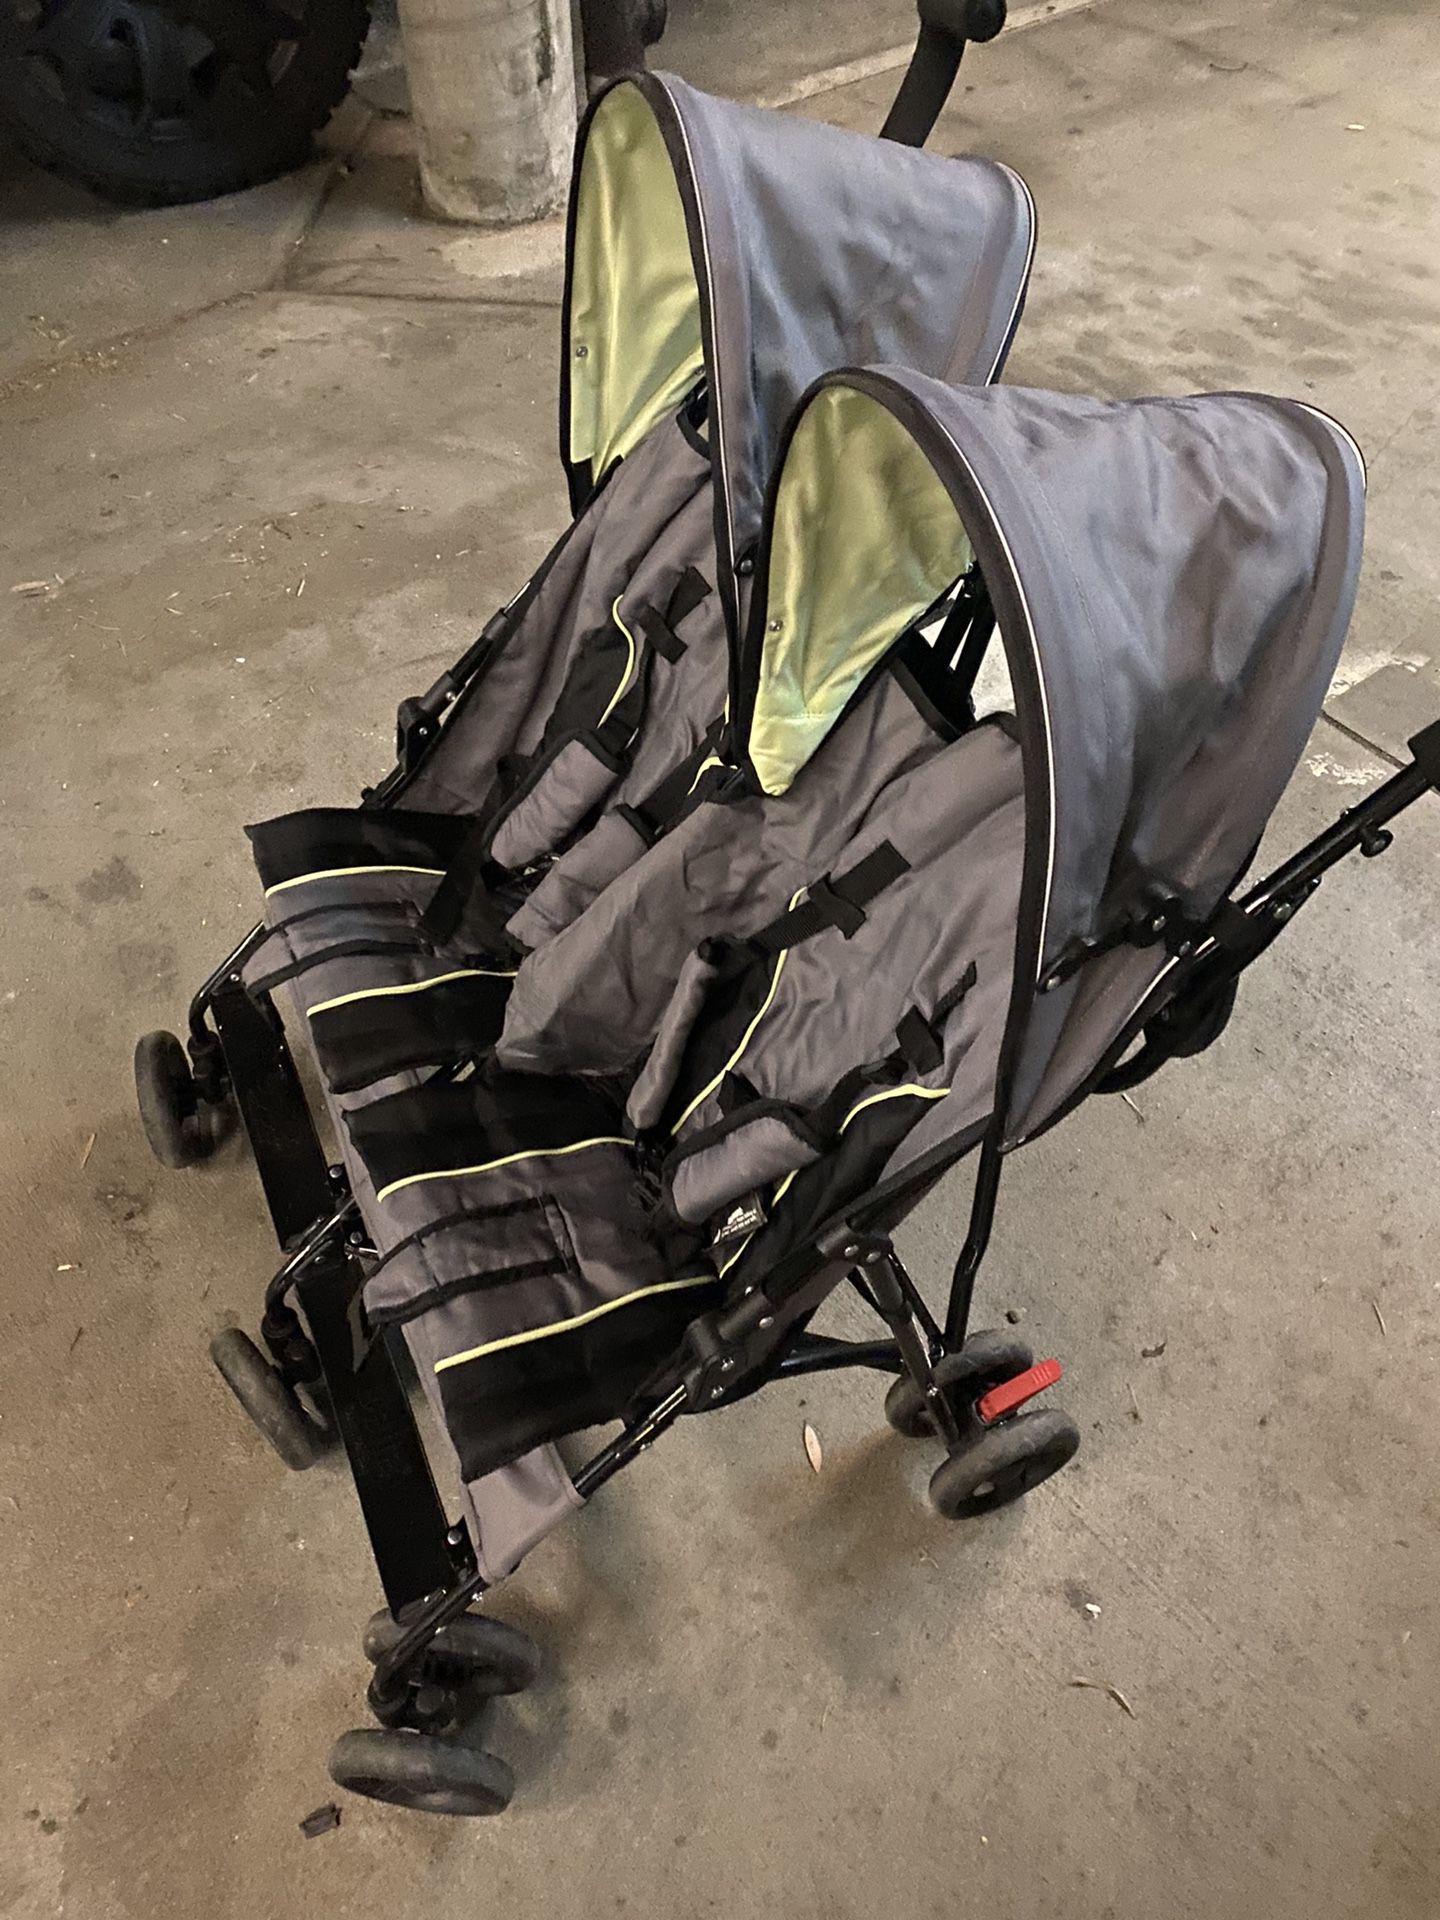 Very clean baby double stroller